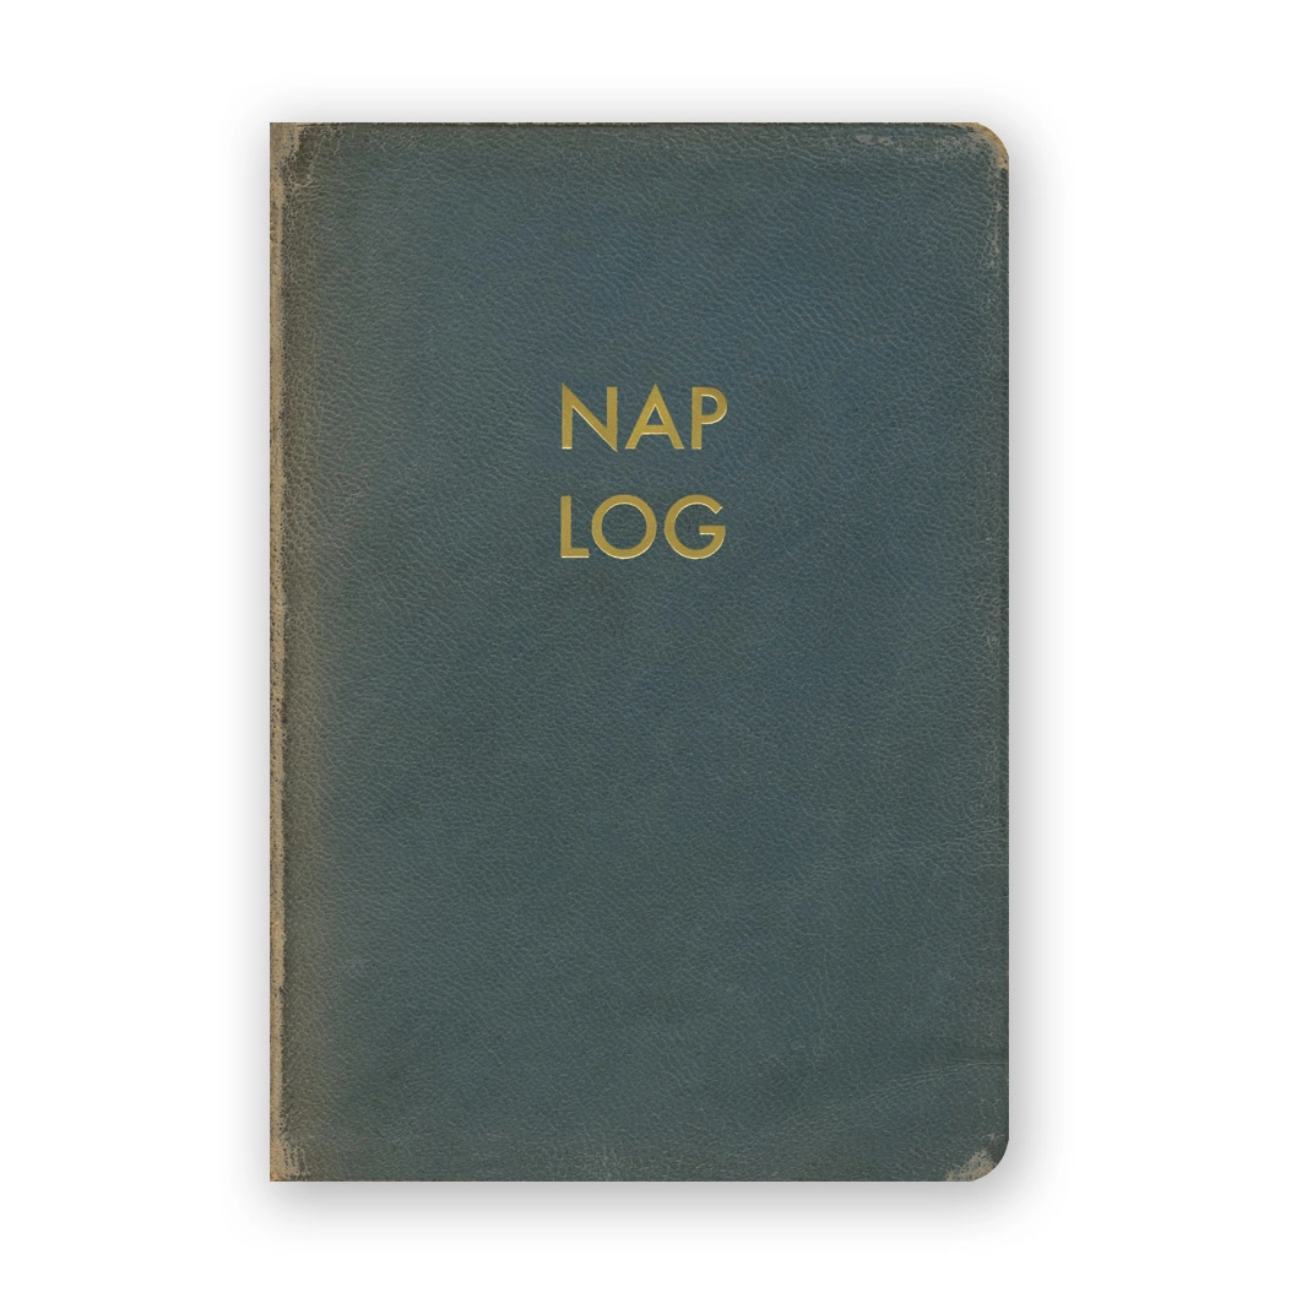 Vintage style pocket sized Nap Log Notebook Journal by The Mincing Mockingbird Sold by Le Monkey House